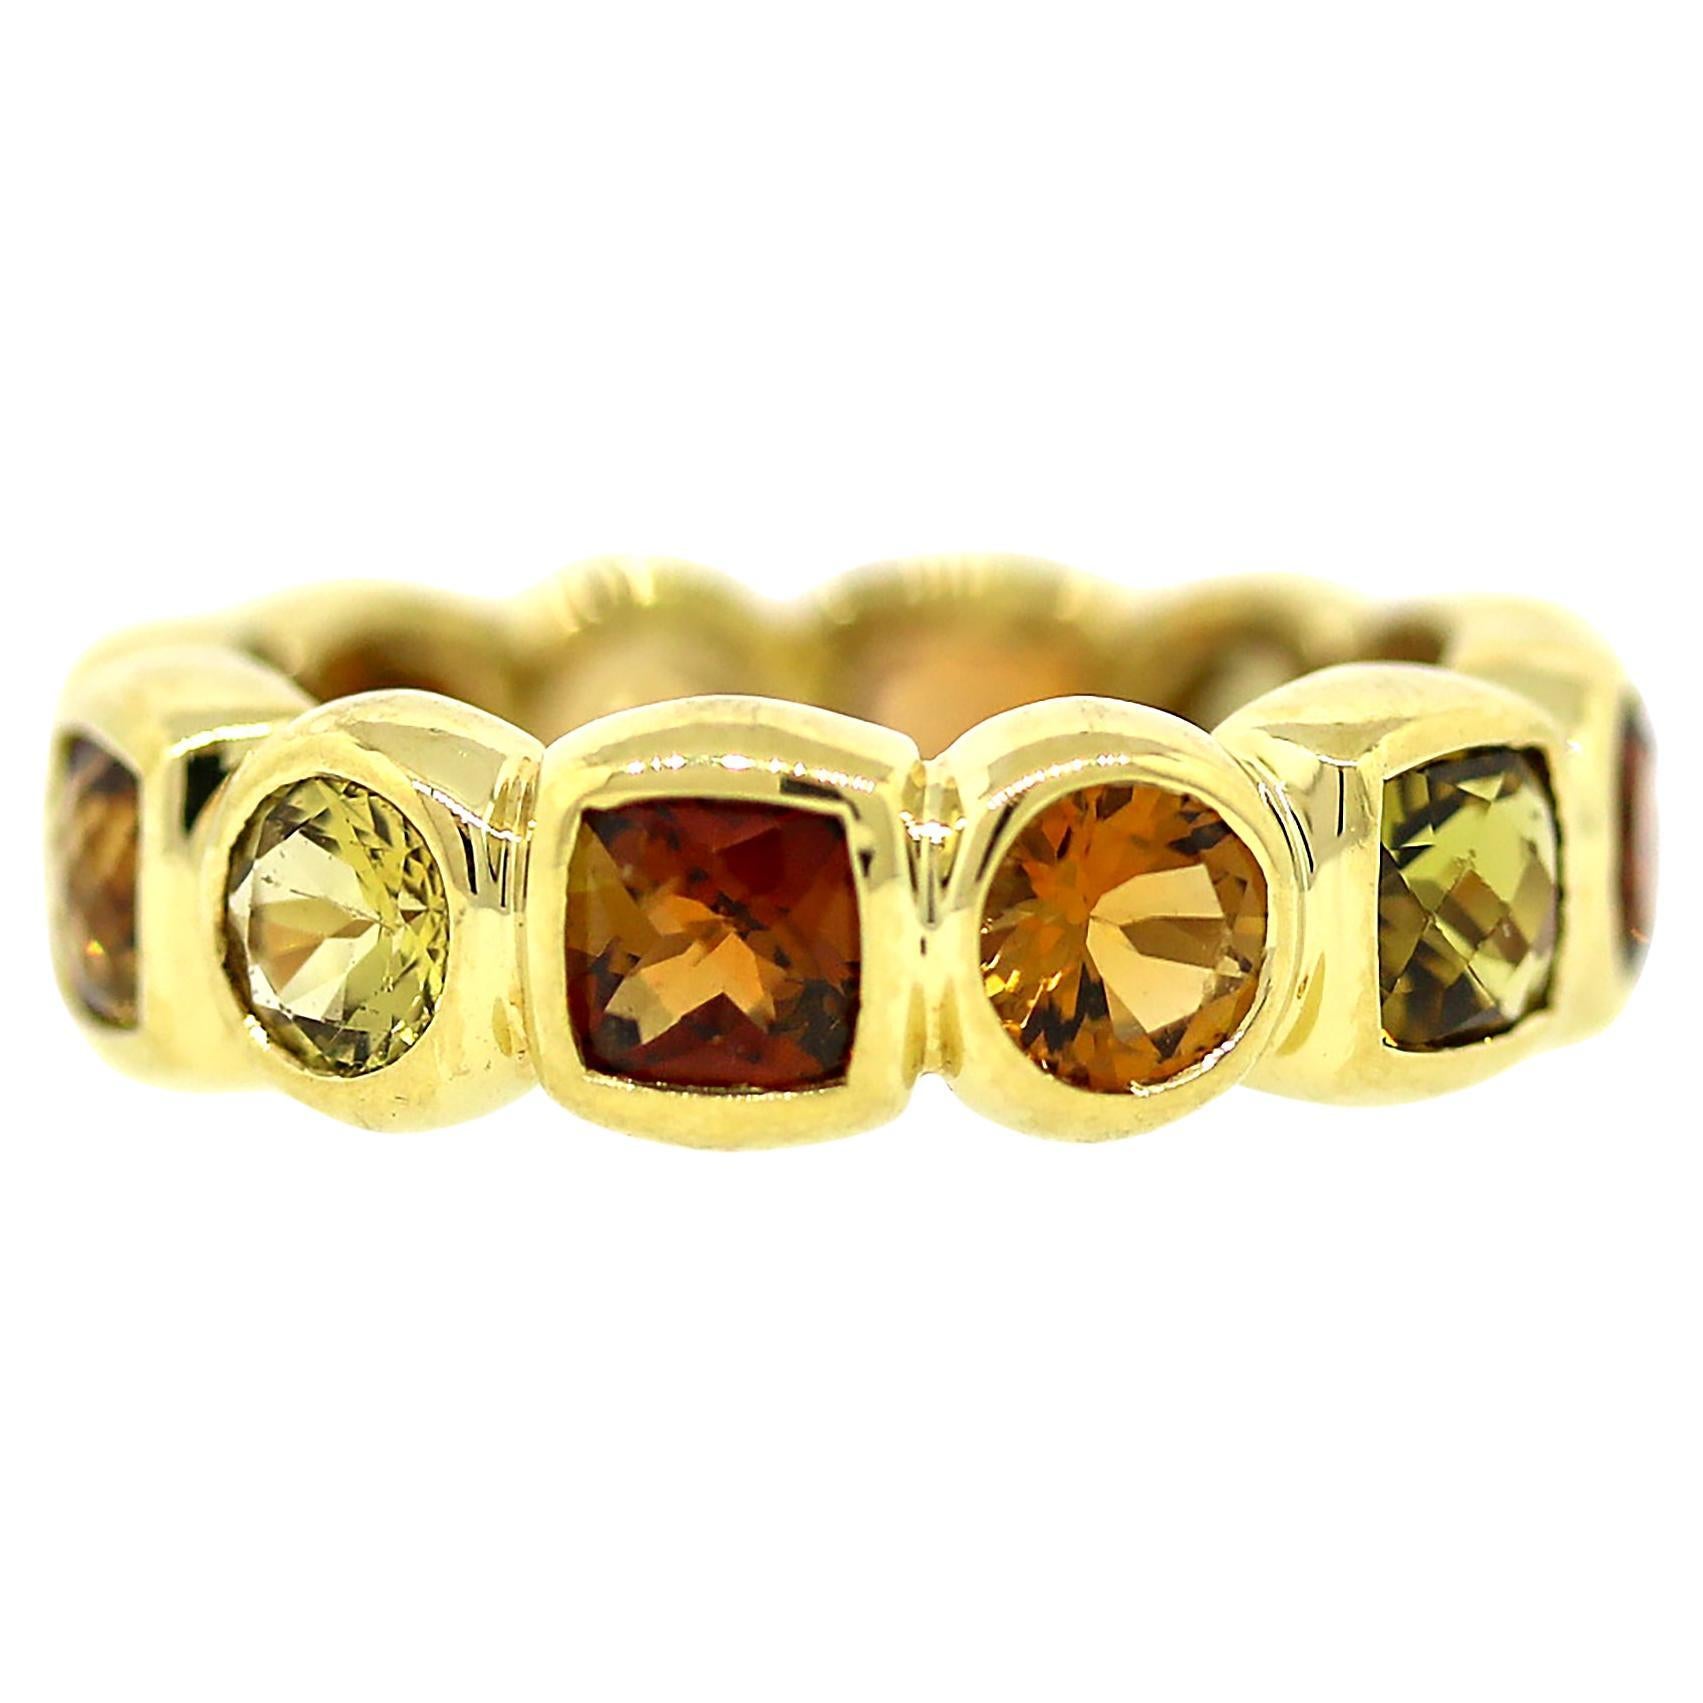 David Yurman Chiclet with Citrine and Peridot Ring in 18k Yellow Gold